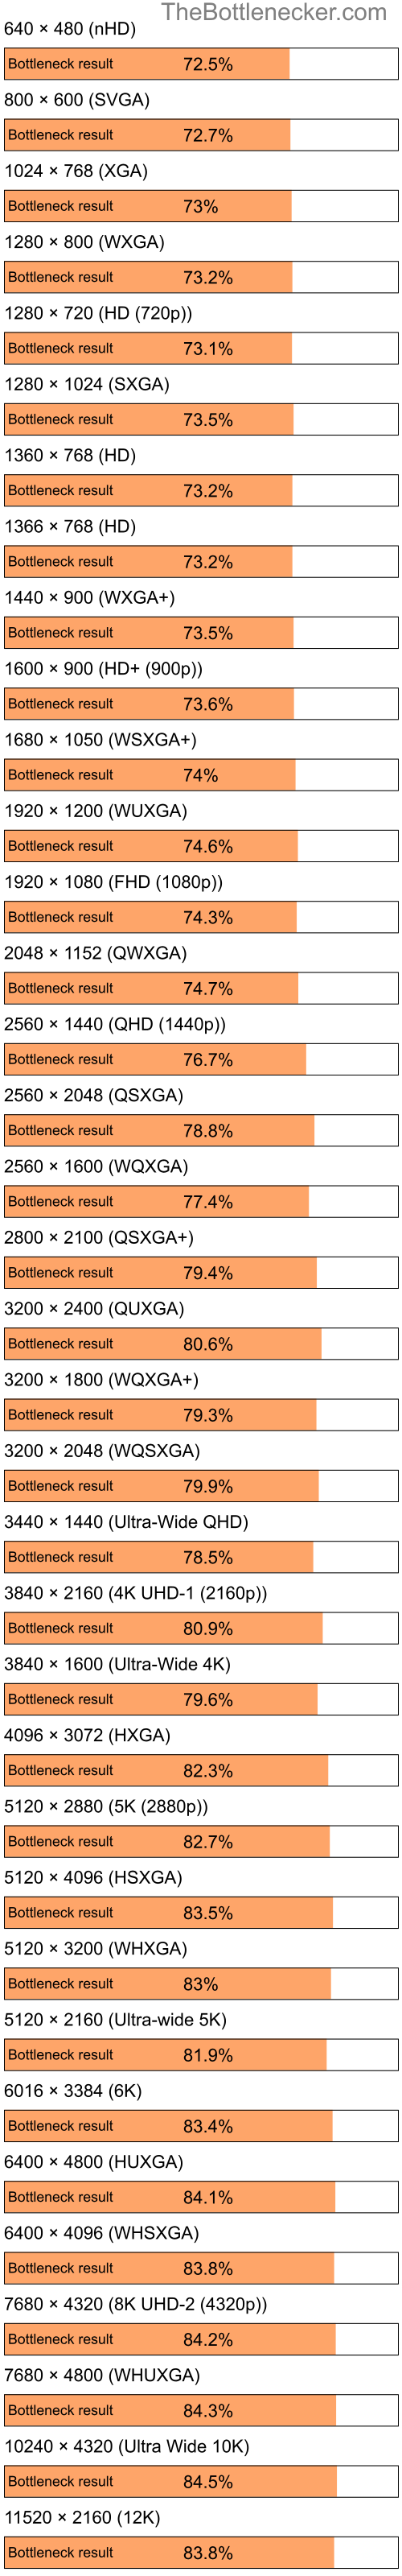 Bottleneck results by resolution for Intel Celeron and NVIDIA GeForce 9100M G in Graphic Card Intense Tasks